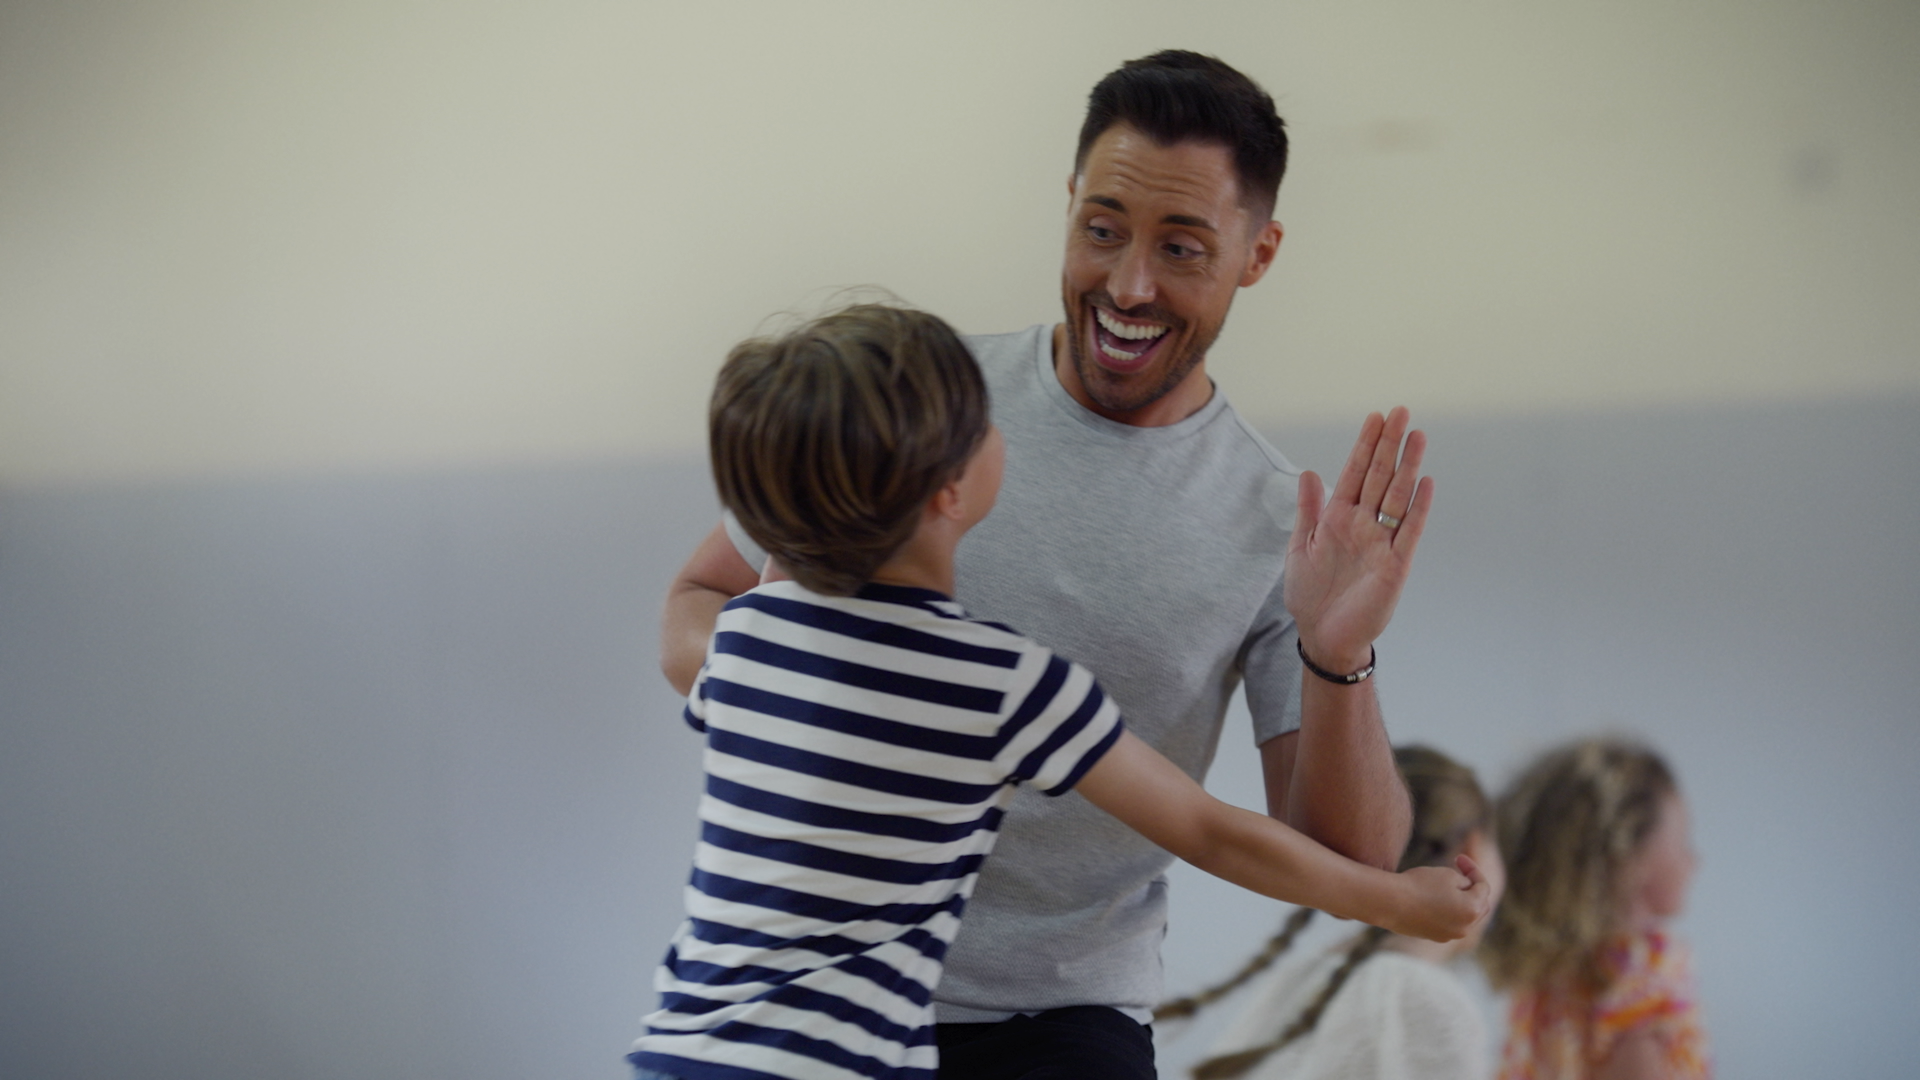 Film actor Ross Adams high fives a leaping child in a black and white striped shirt.